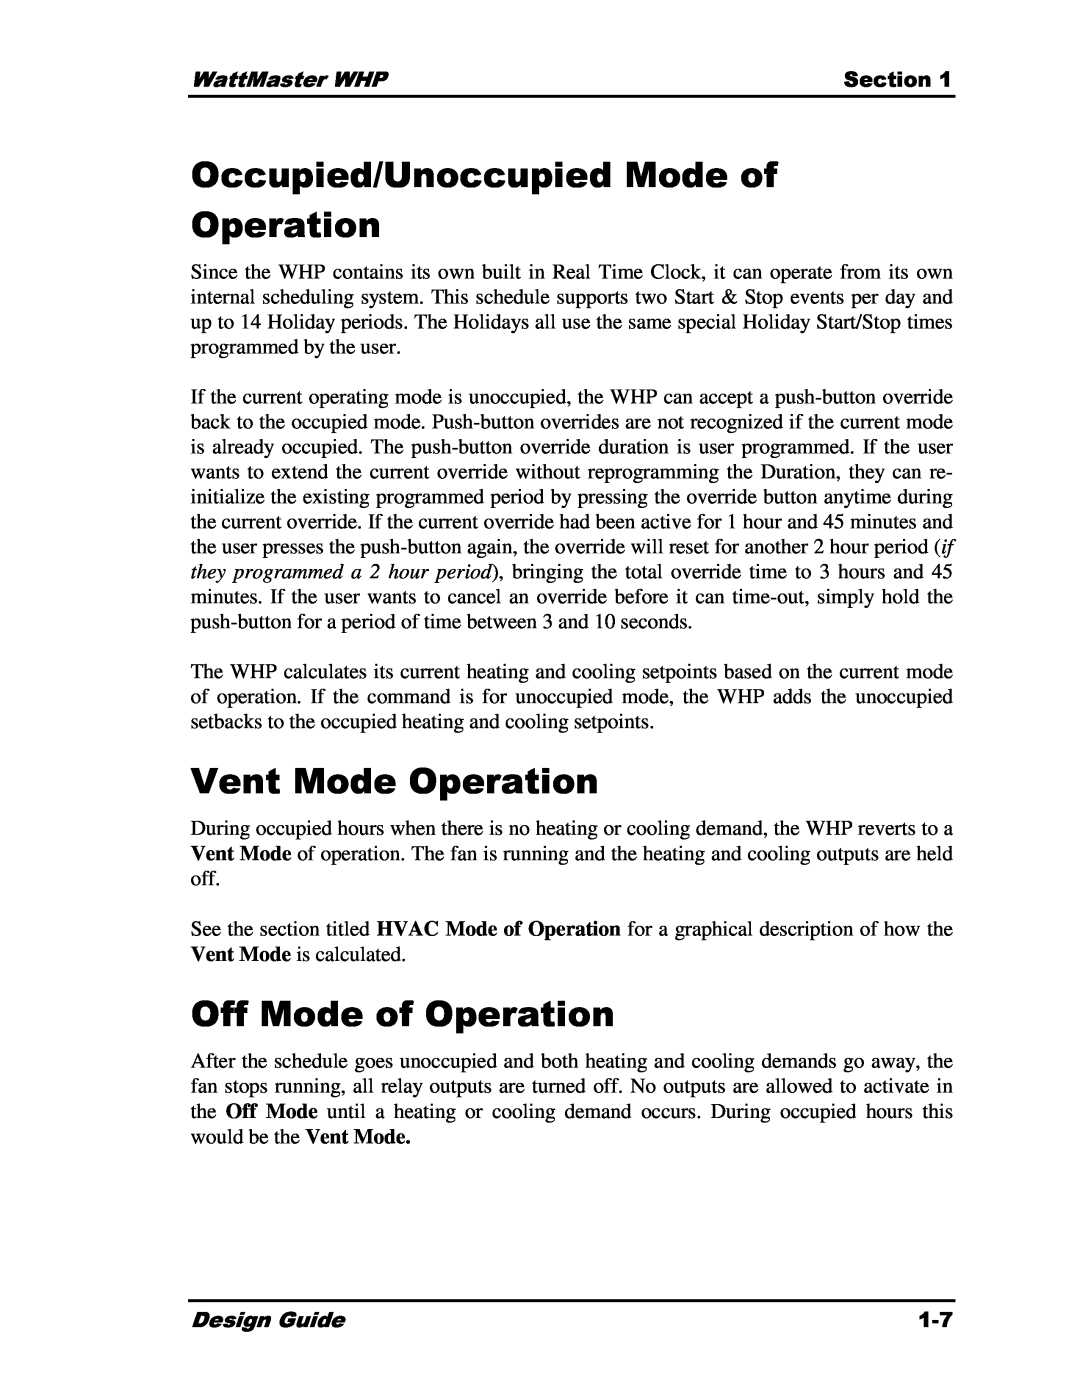 Heat Controller Water Source Heat Pump Occupied/Unoccupied Mode of Operation, Vent Mode Operation, Off Mode of Operation 